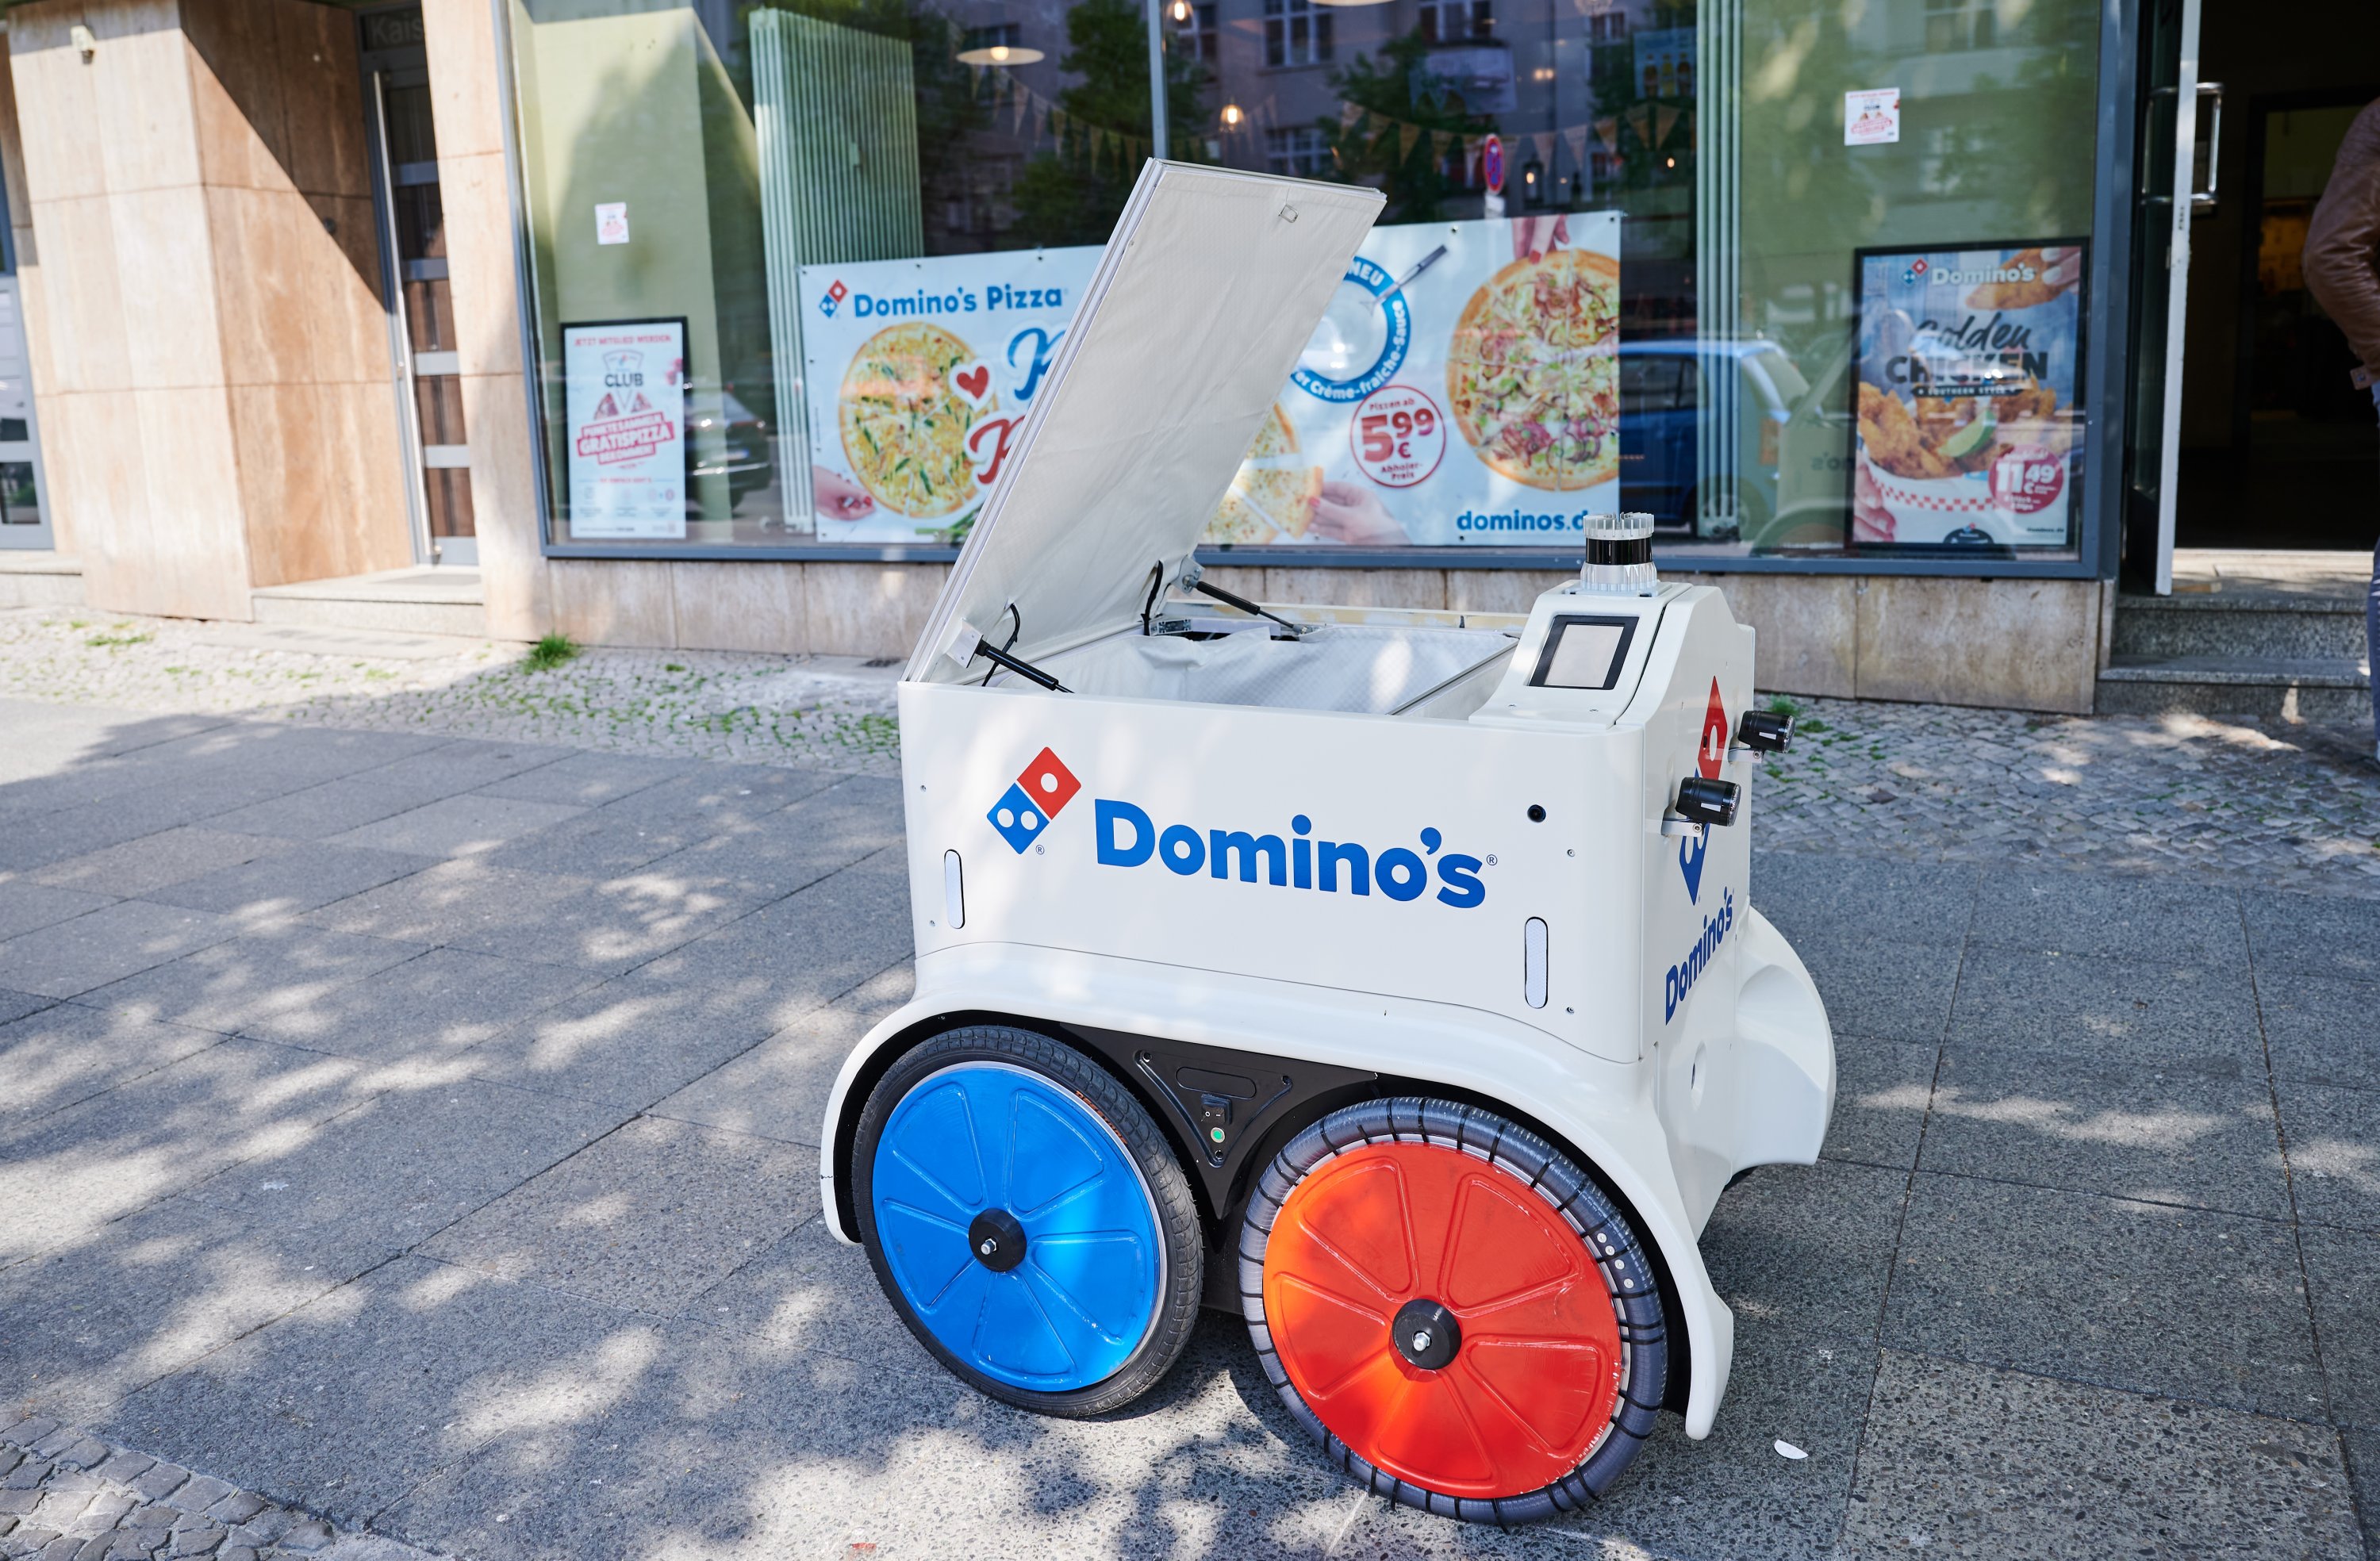 While it's fun to look at, the Domino's pizza delivery robot comes with some limitations. For example, it can only deliver within a tight radius of the restaurant so that the food isn't cold when it arrives at the customer's door, Berlin, Germany, May 2, 2022. (DPA Photo)